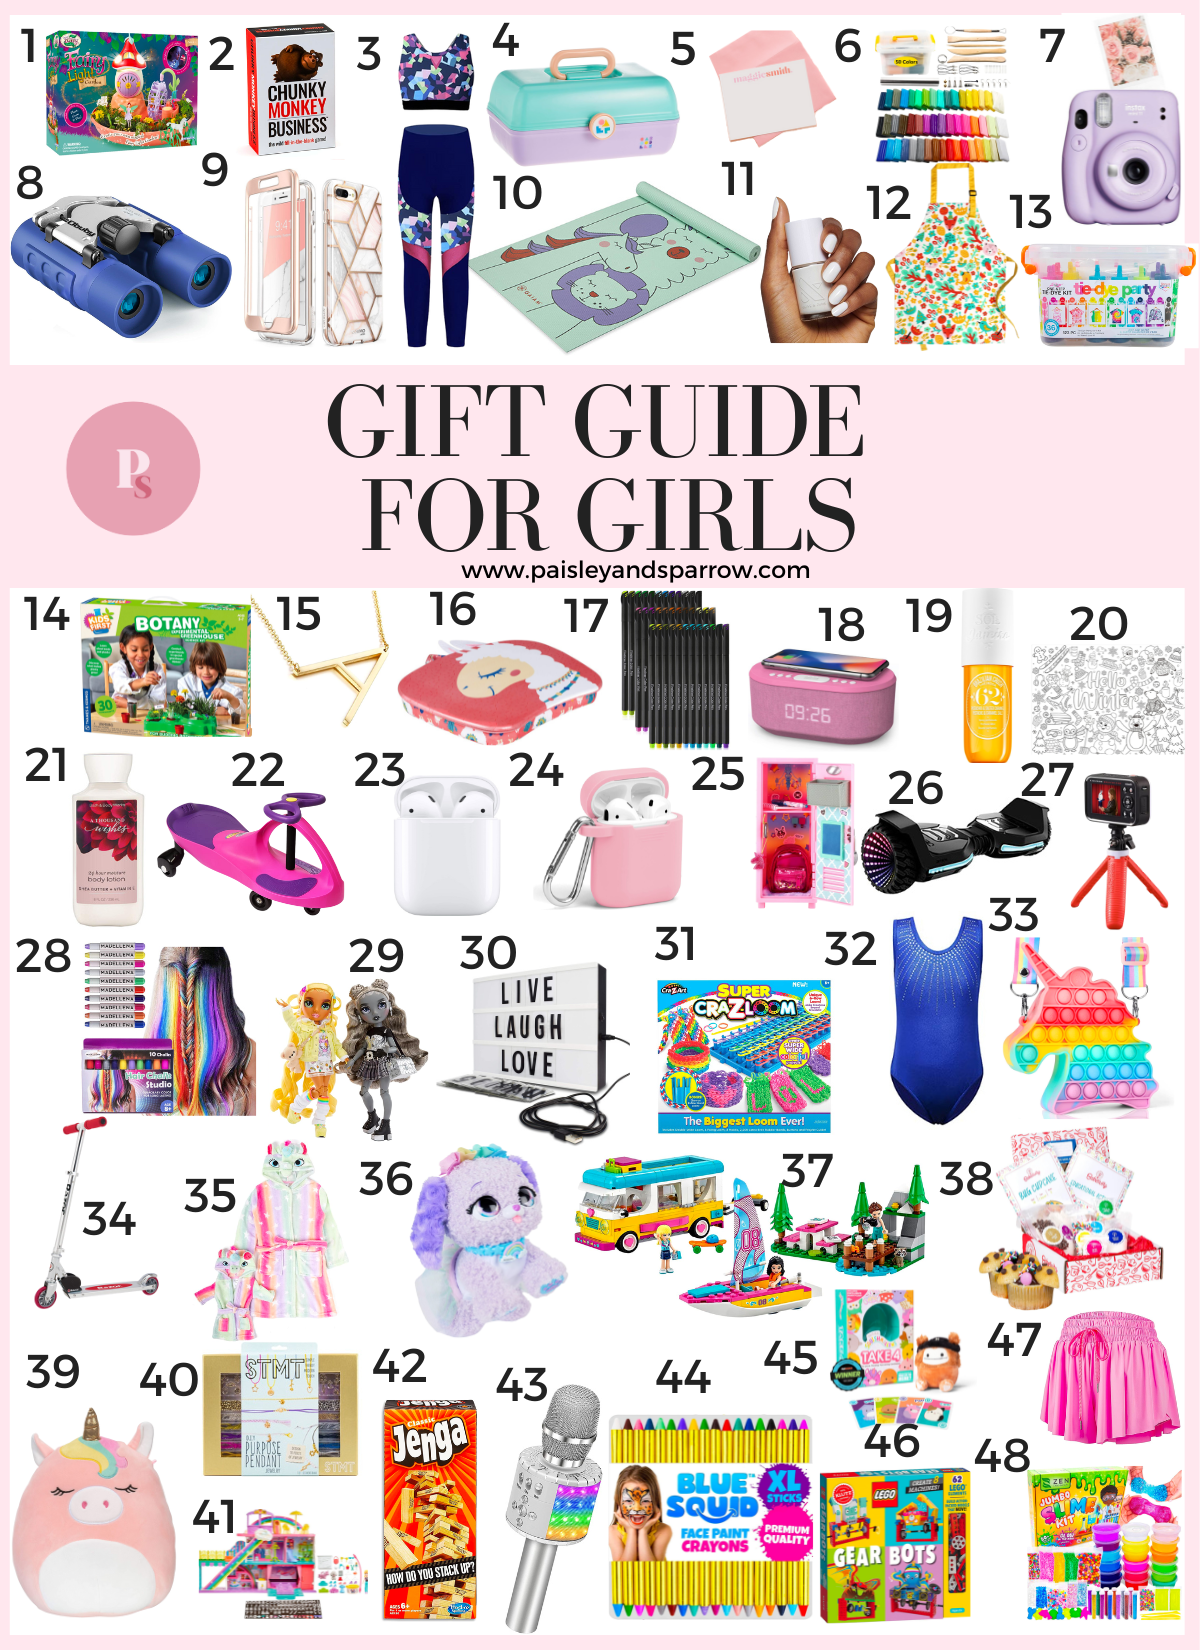 32 Genius Christmas Gifts For College Girls! - Positivity is Pretty